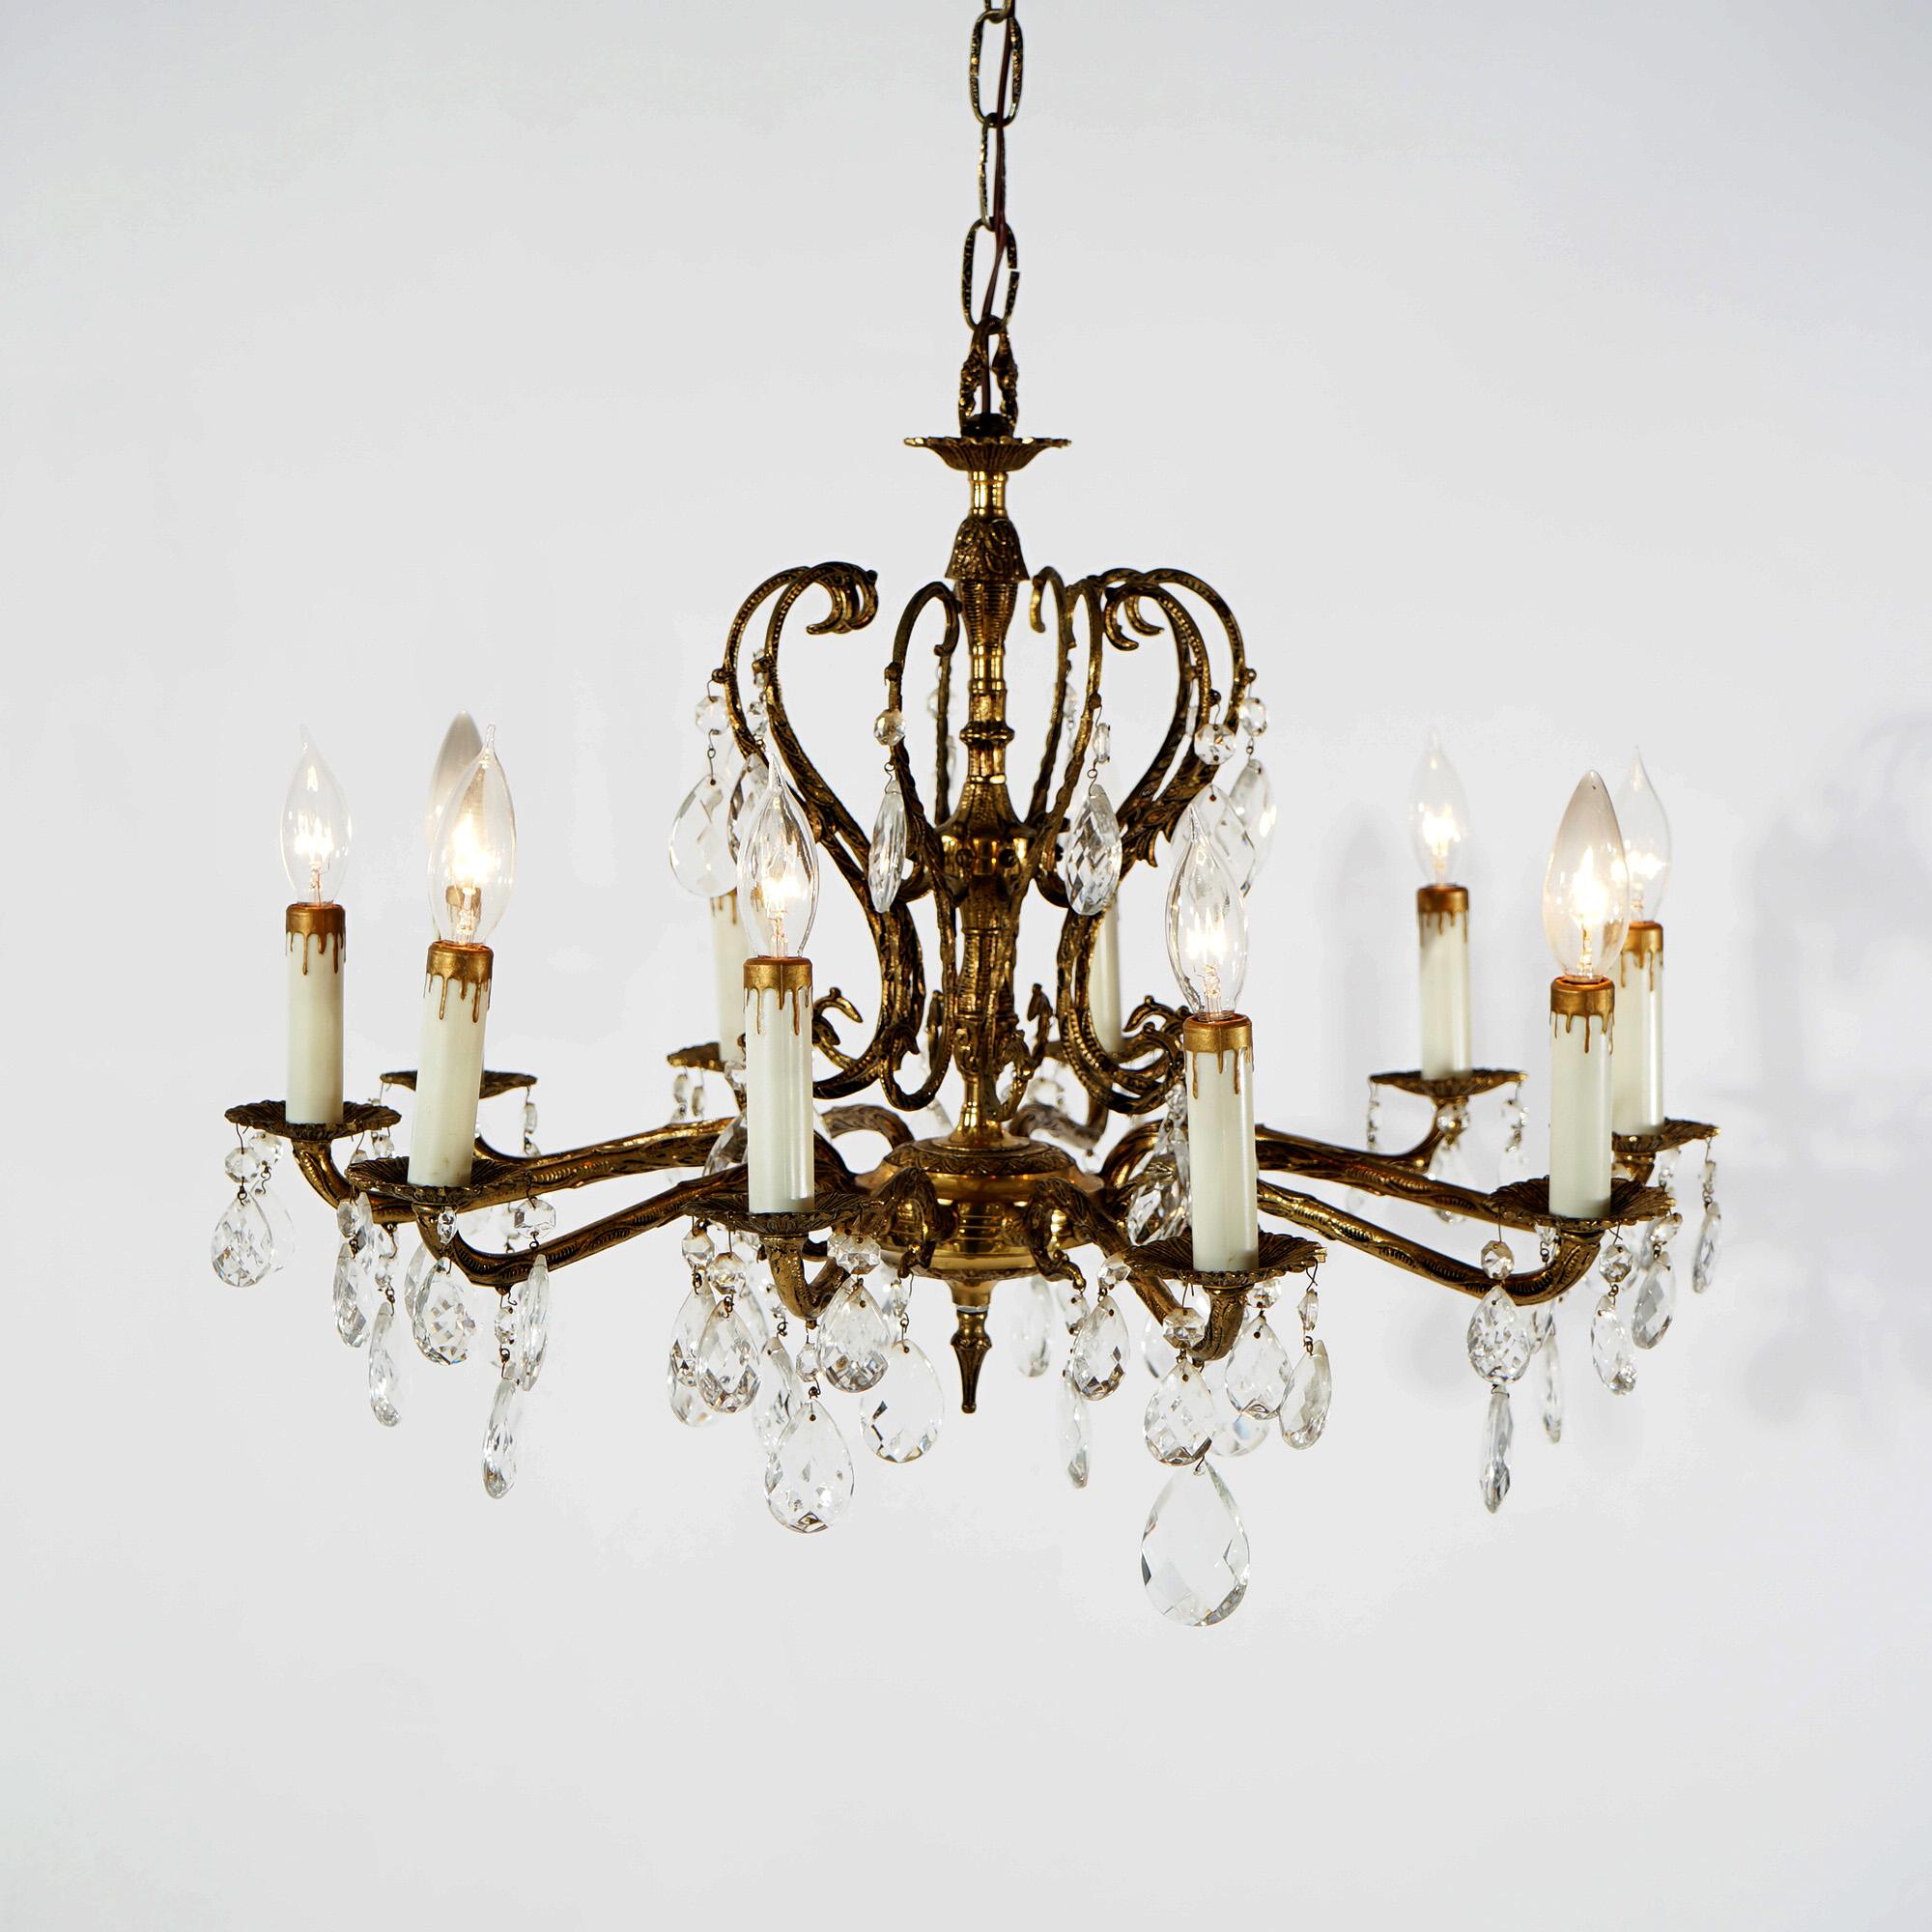 American French Style Bronzed Metal & Crystal Ten Light Chandelier, circa 1940 For Sale